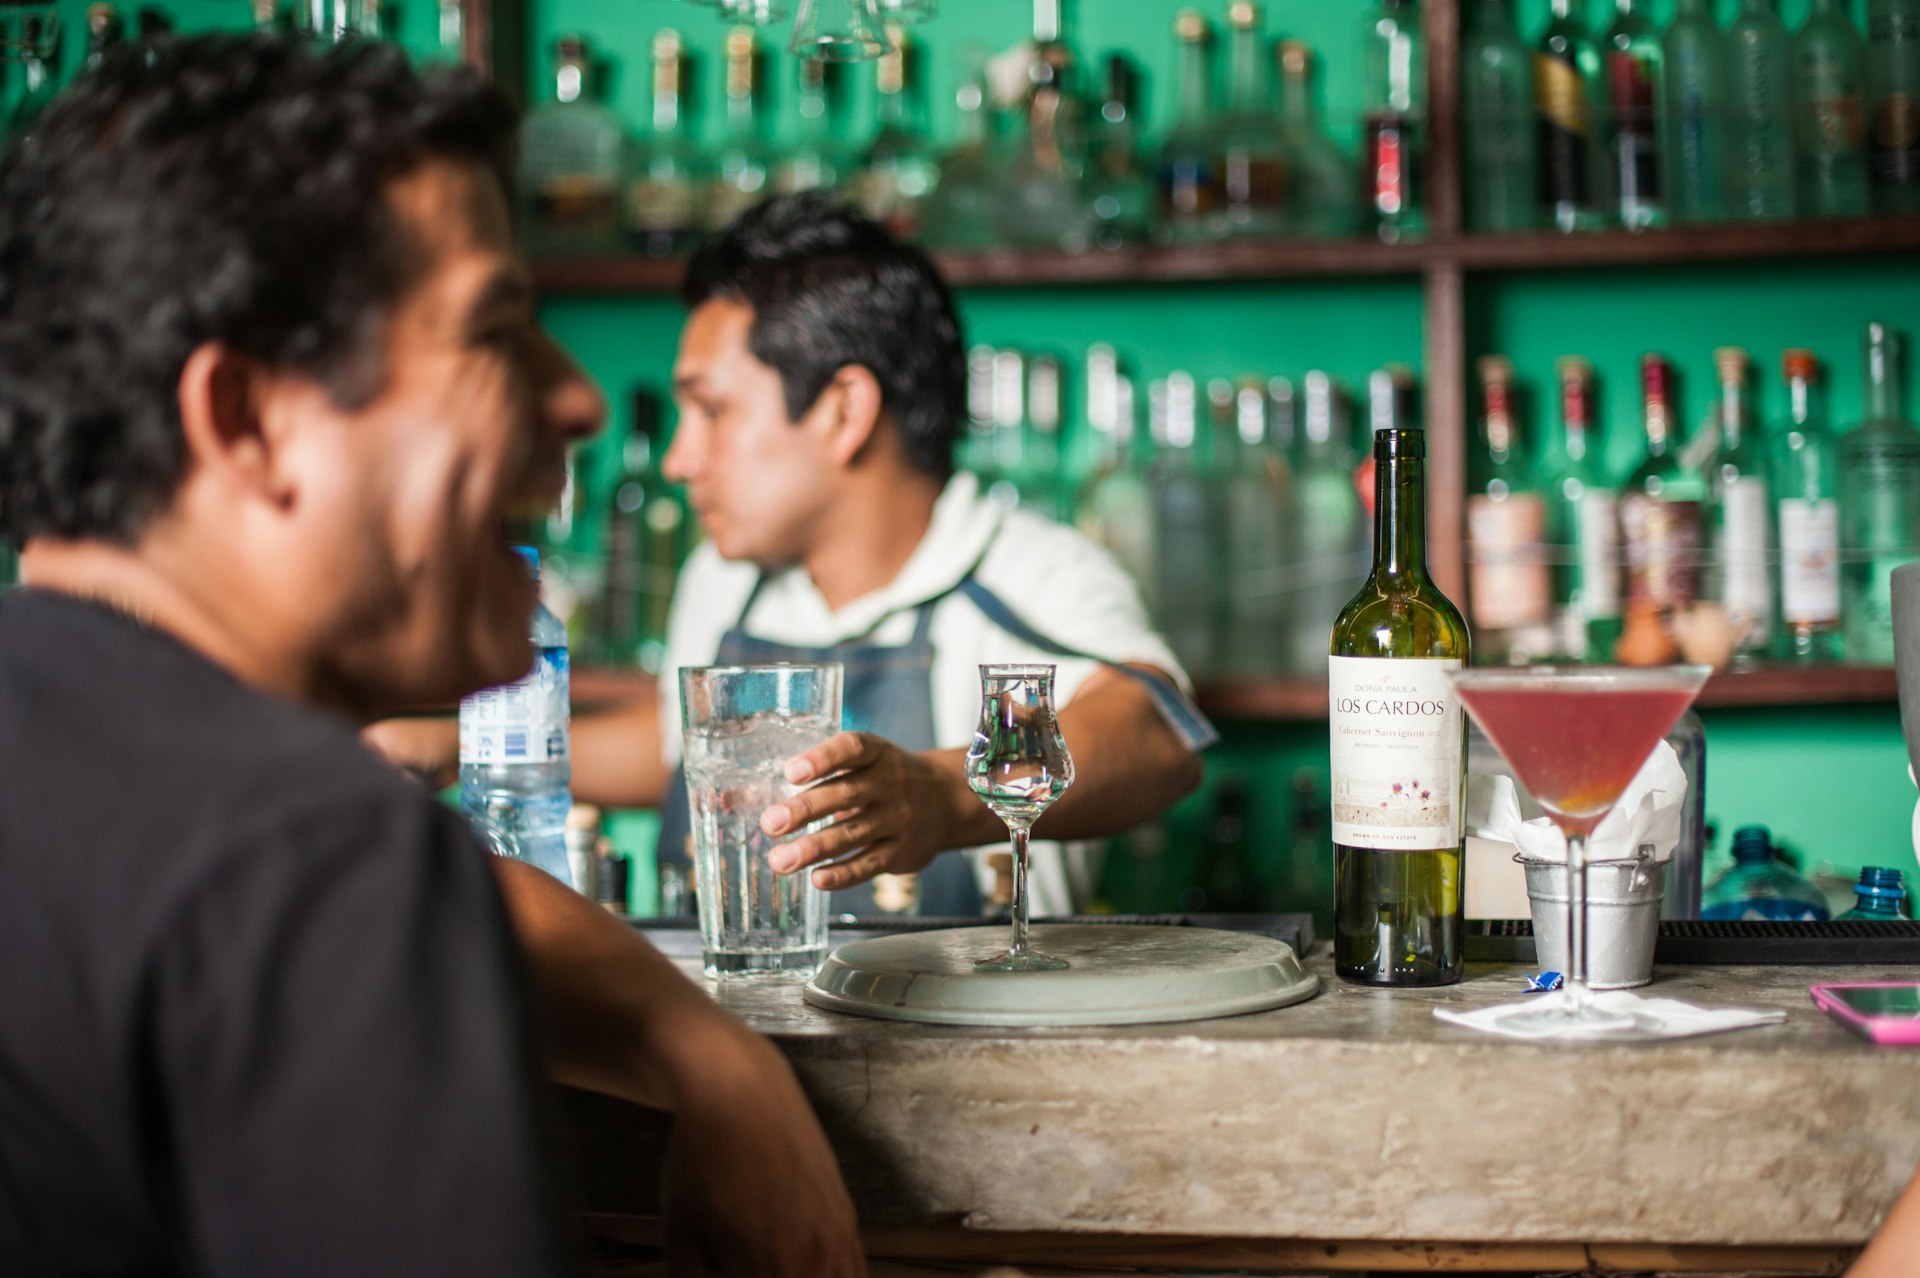 Vintage South American bar, people drinking cocktails, being served by the bartender. Alcoholic beverage bottles and drink glasses displayed in the background